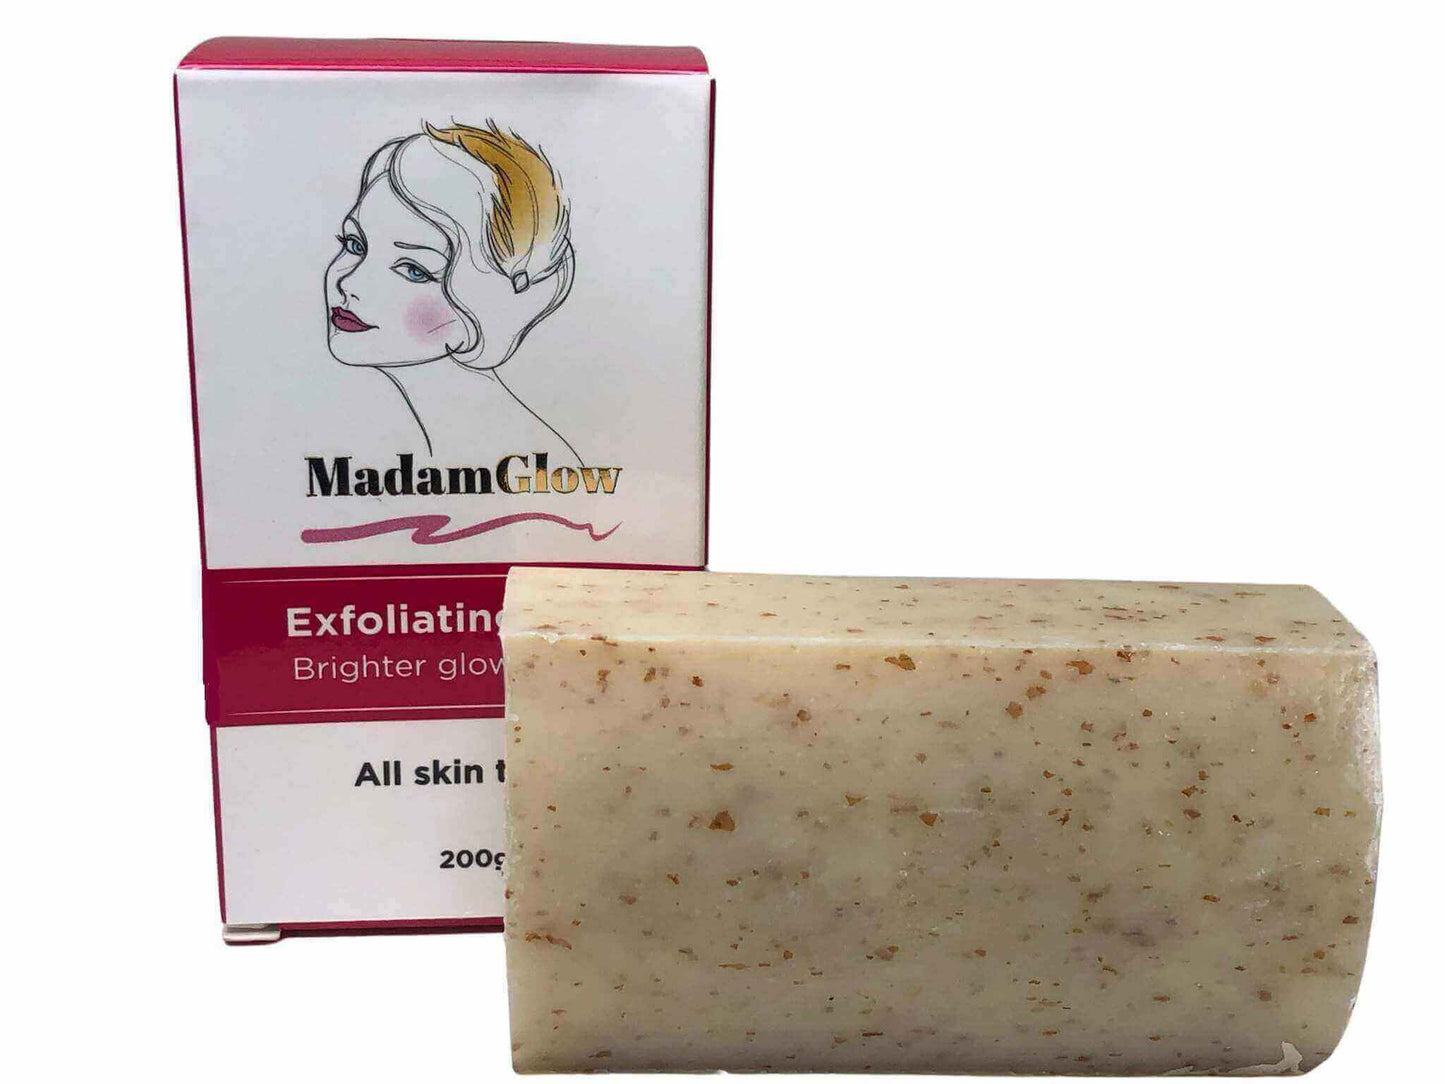 exfoliating soap for skin perfection it fades blemishes hyperpigmentation stretchmarks whiteheads reduces acne inflammation and most skin irritants including body odor. Safe for vulva exfoliation